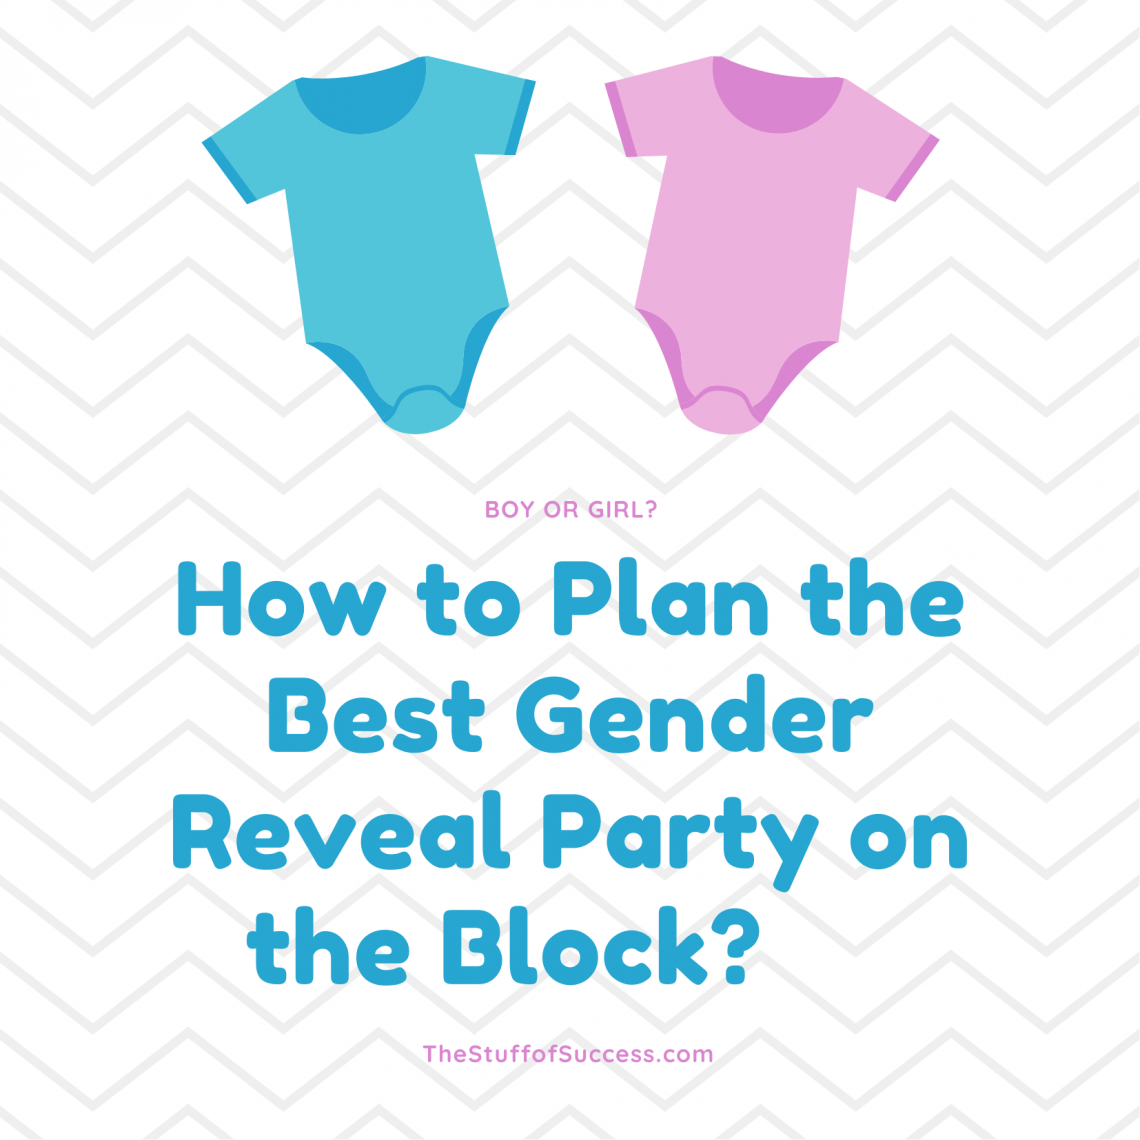 How to Plan the Best Gender Reveal Party on the Block?